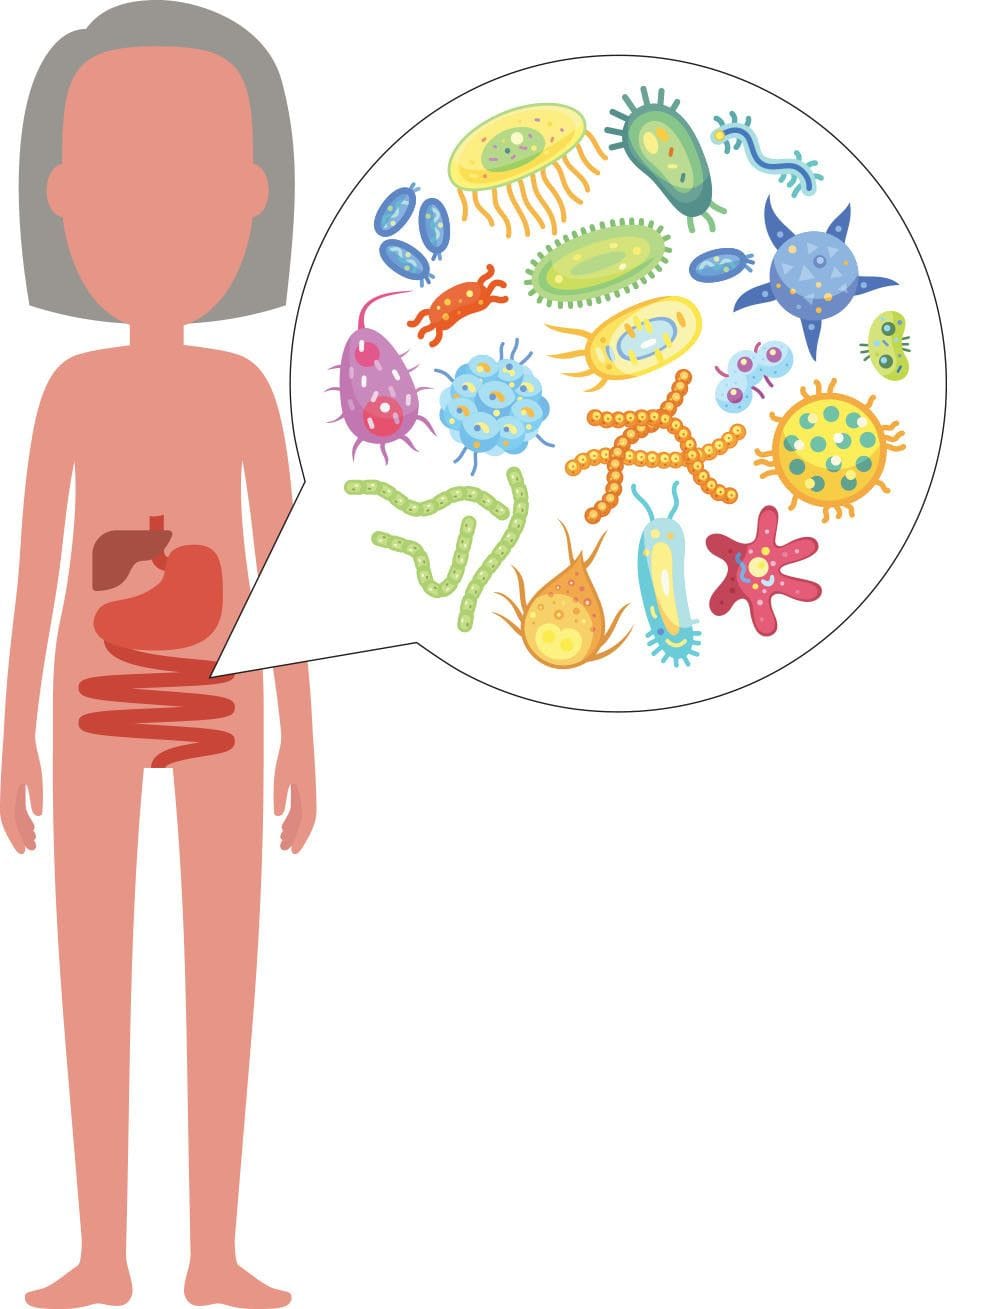 Link Between Gut Microbiome And Kidney Cancer Treatment Outcomes